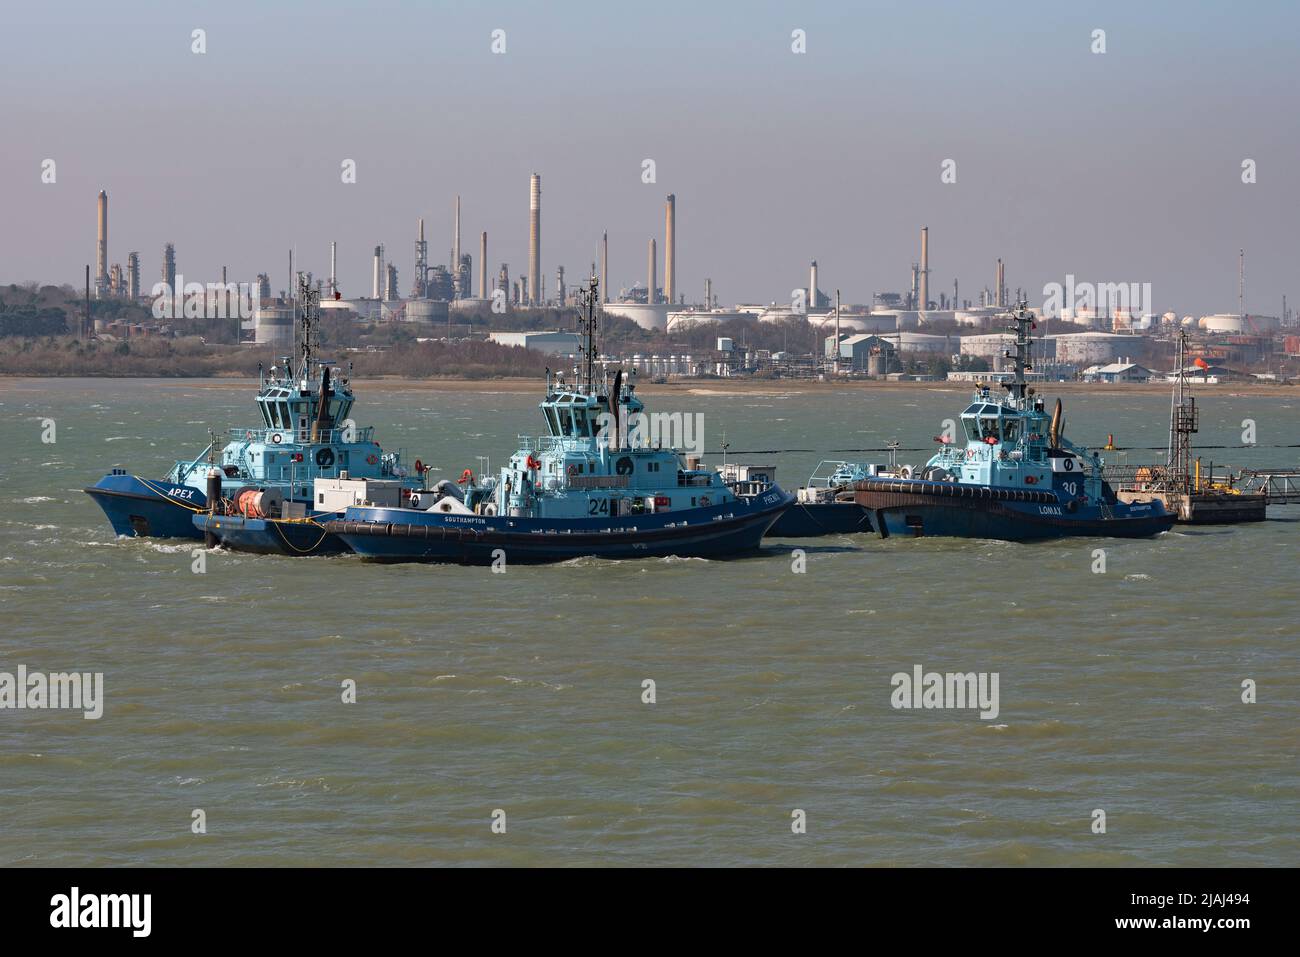 Fawley, Southampton, England, UK. 2022.  Three ocean going tugs alongside a jetty with a background of Fawley Refinery, storage tanks, chimneys and sm Stock Photo